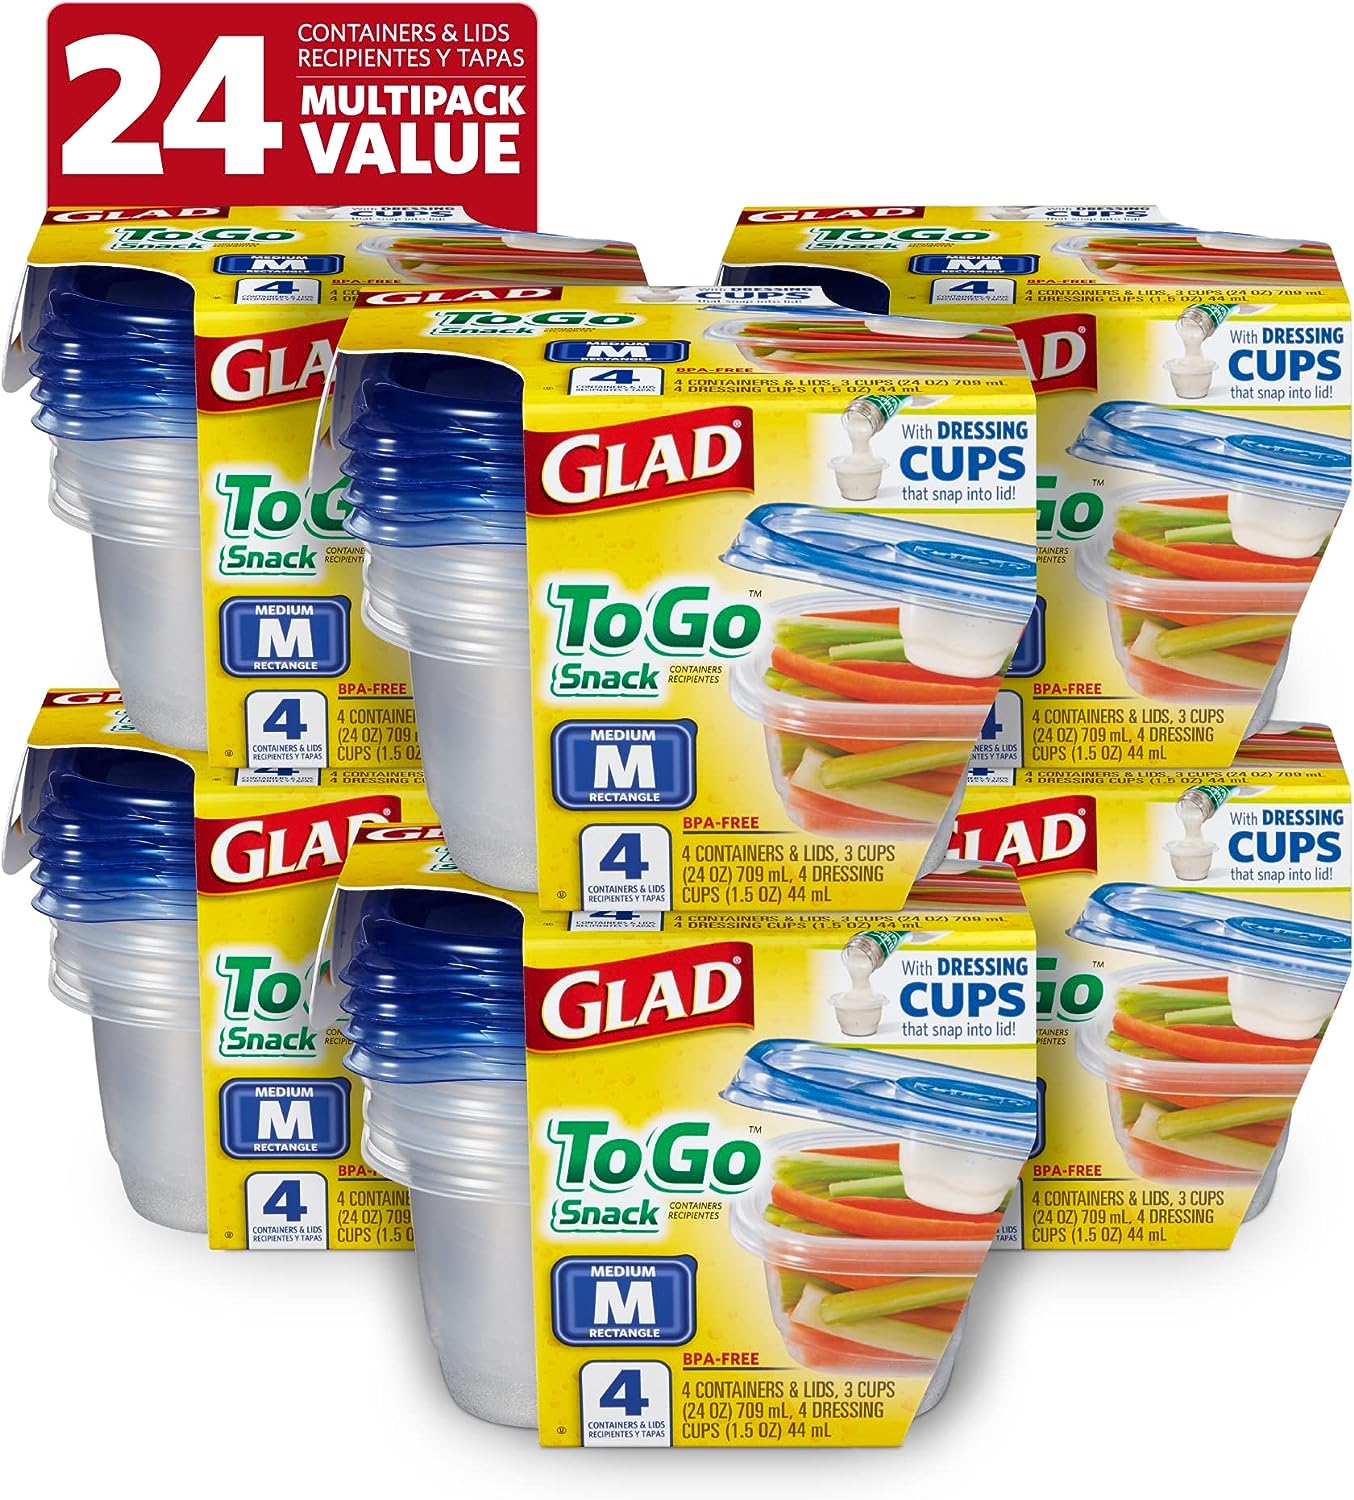 42 oz 3-Count Gladware Tall Entree Container 